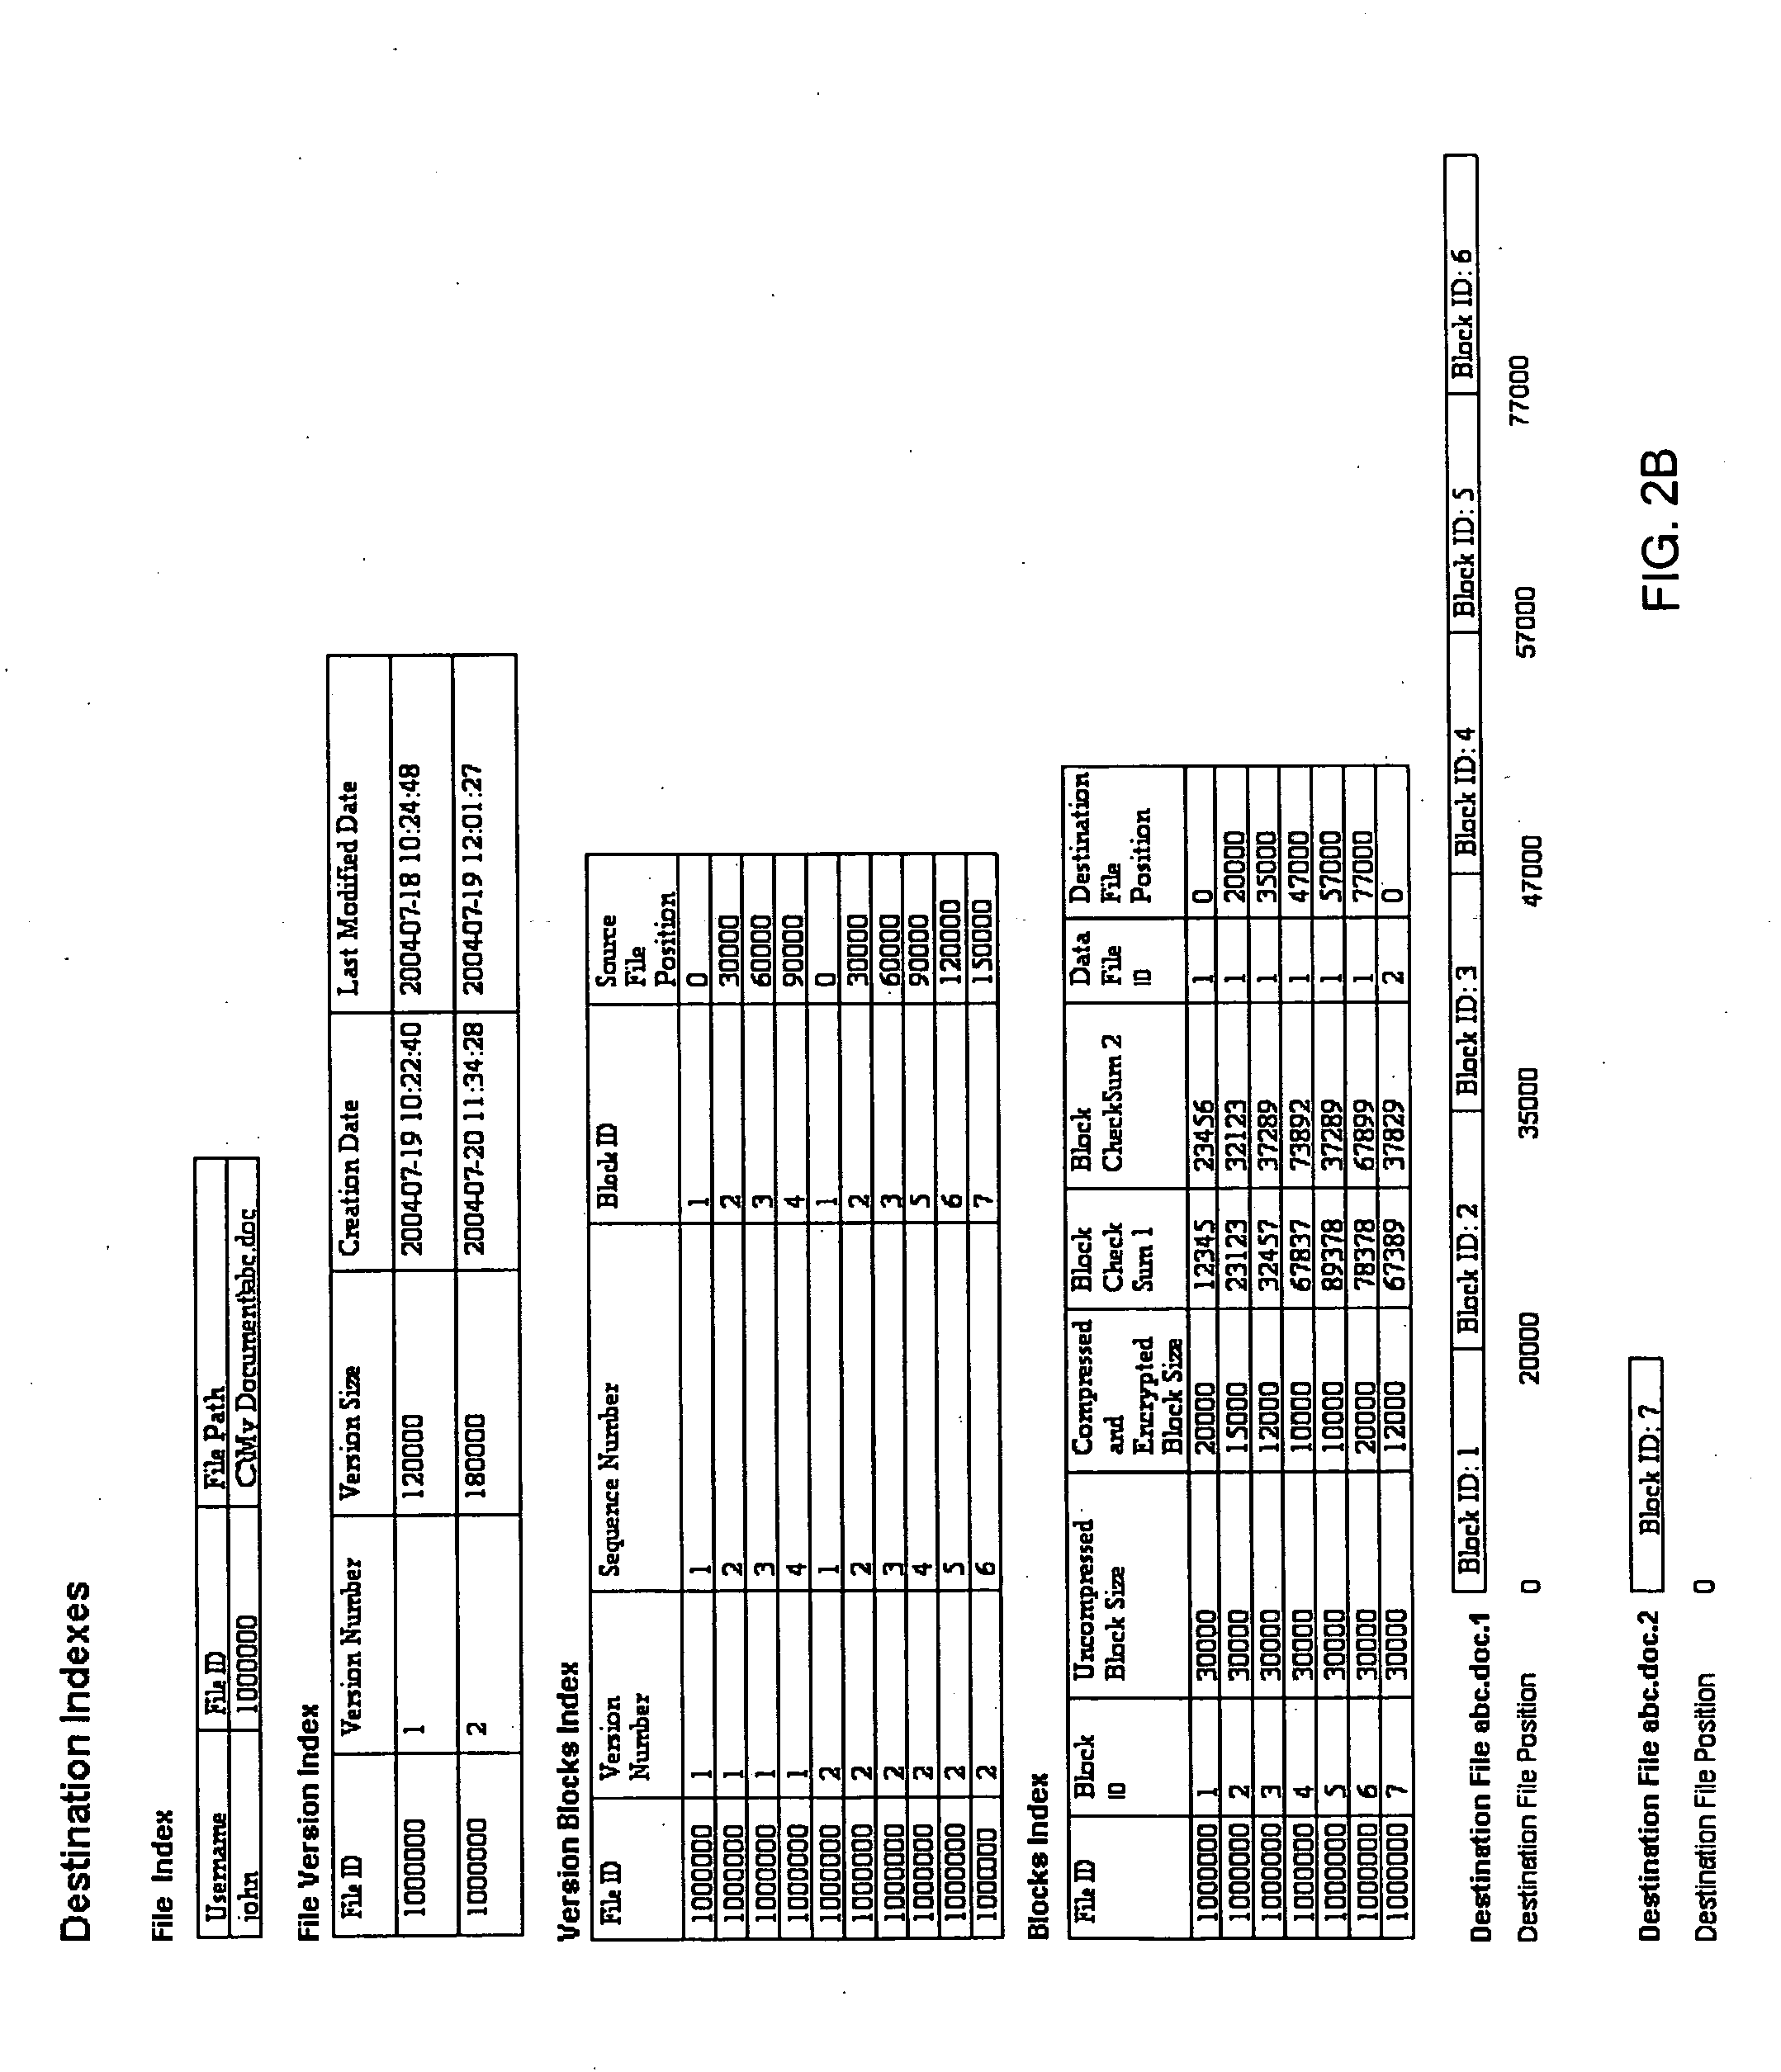 Systems and methods for storing, backing up and recovering computer data files